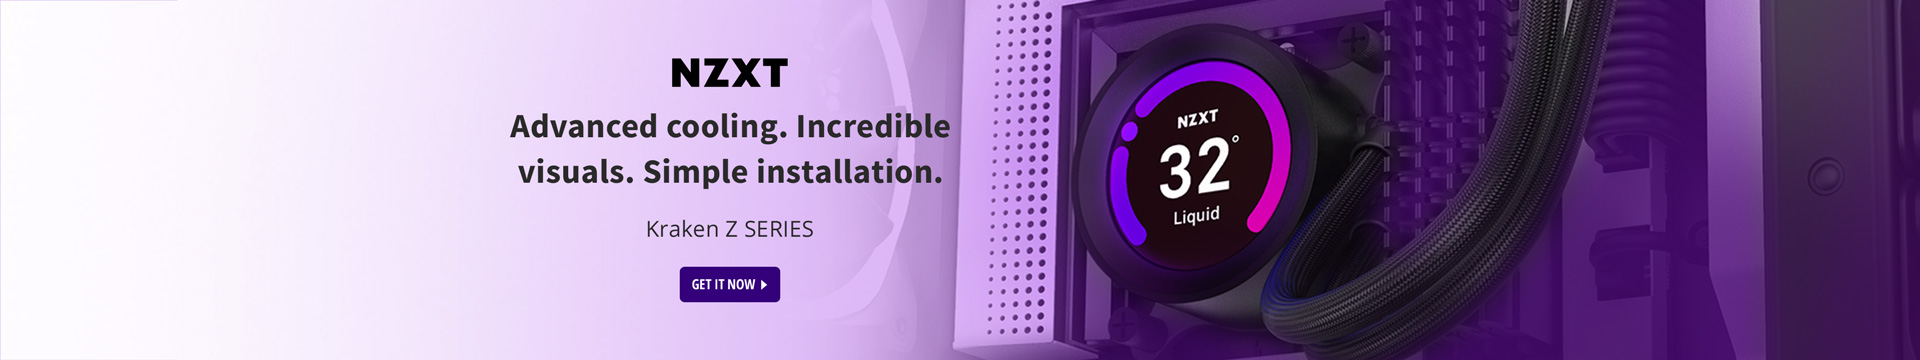 Advanced cooling, incredible visuals, simple installation